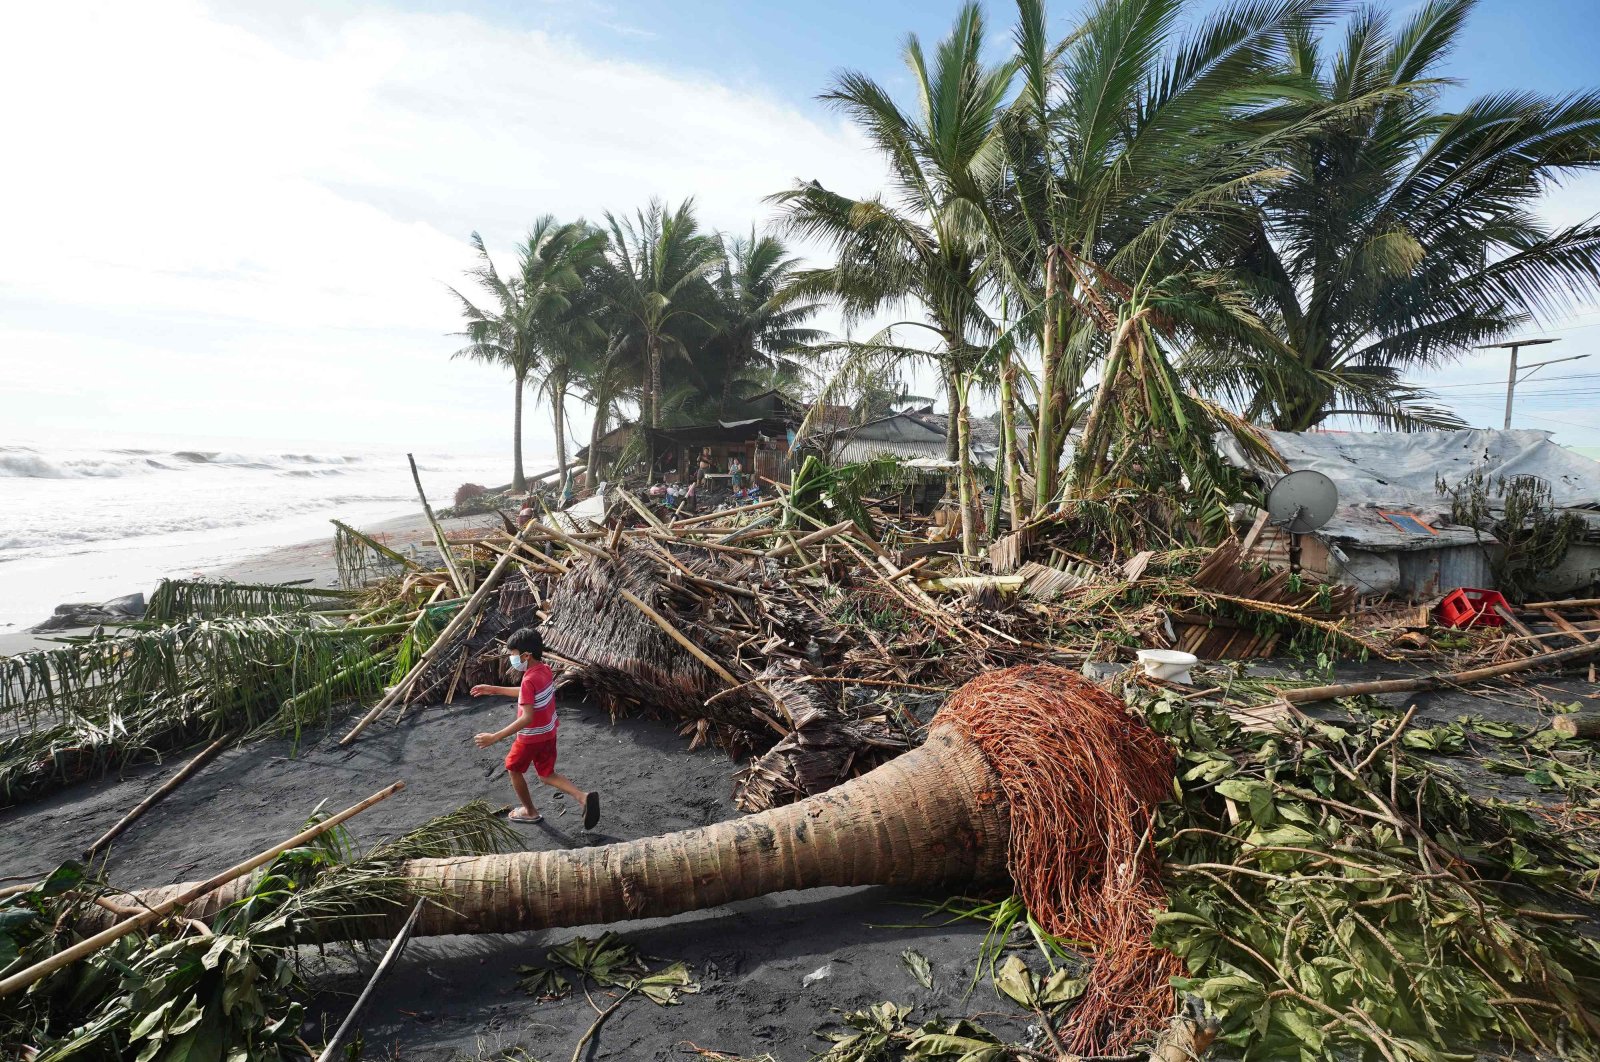 A child plays next to uprooted coconut and banana trees in the coastal town of Dulag in Leyte province a day after Super Typhoon Rai hit, Philippines, Dec. 17, 2021. (AFP Photo)